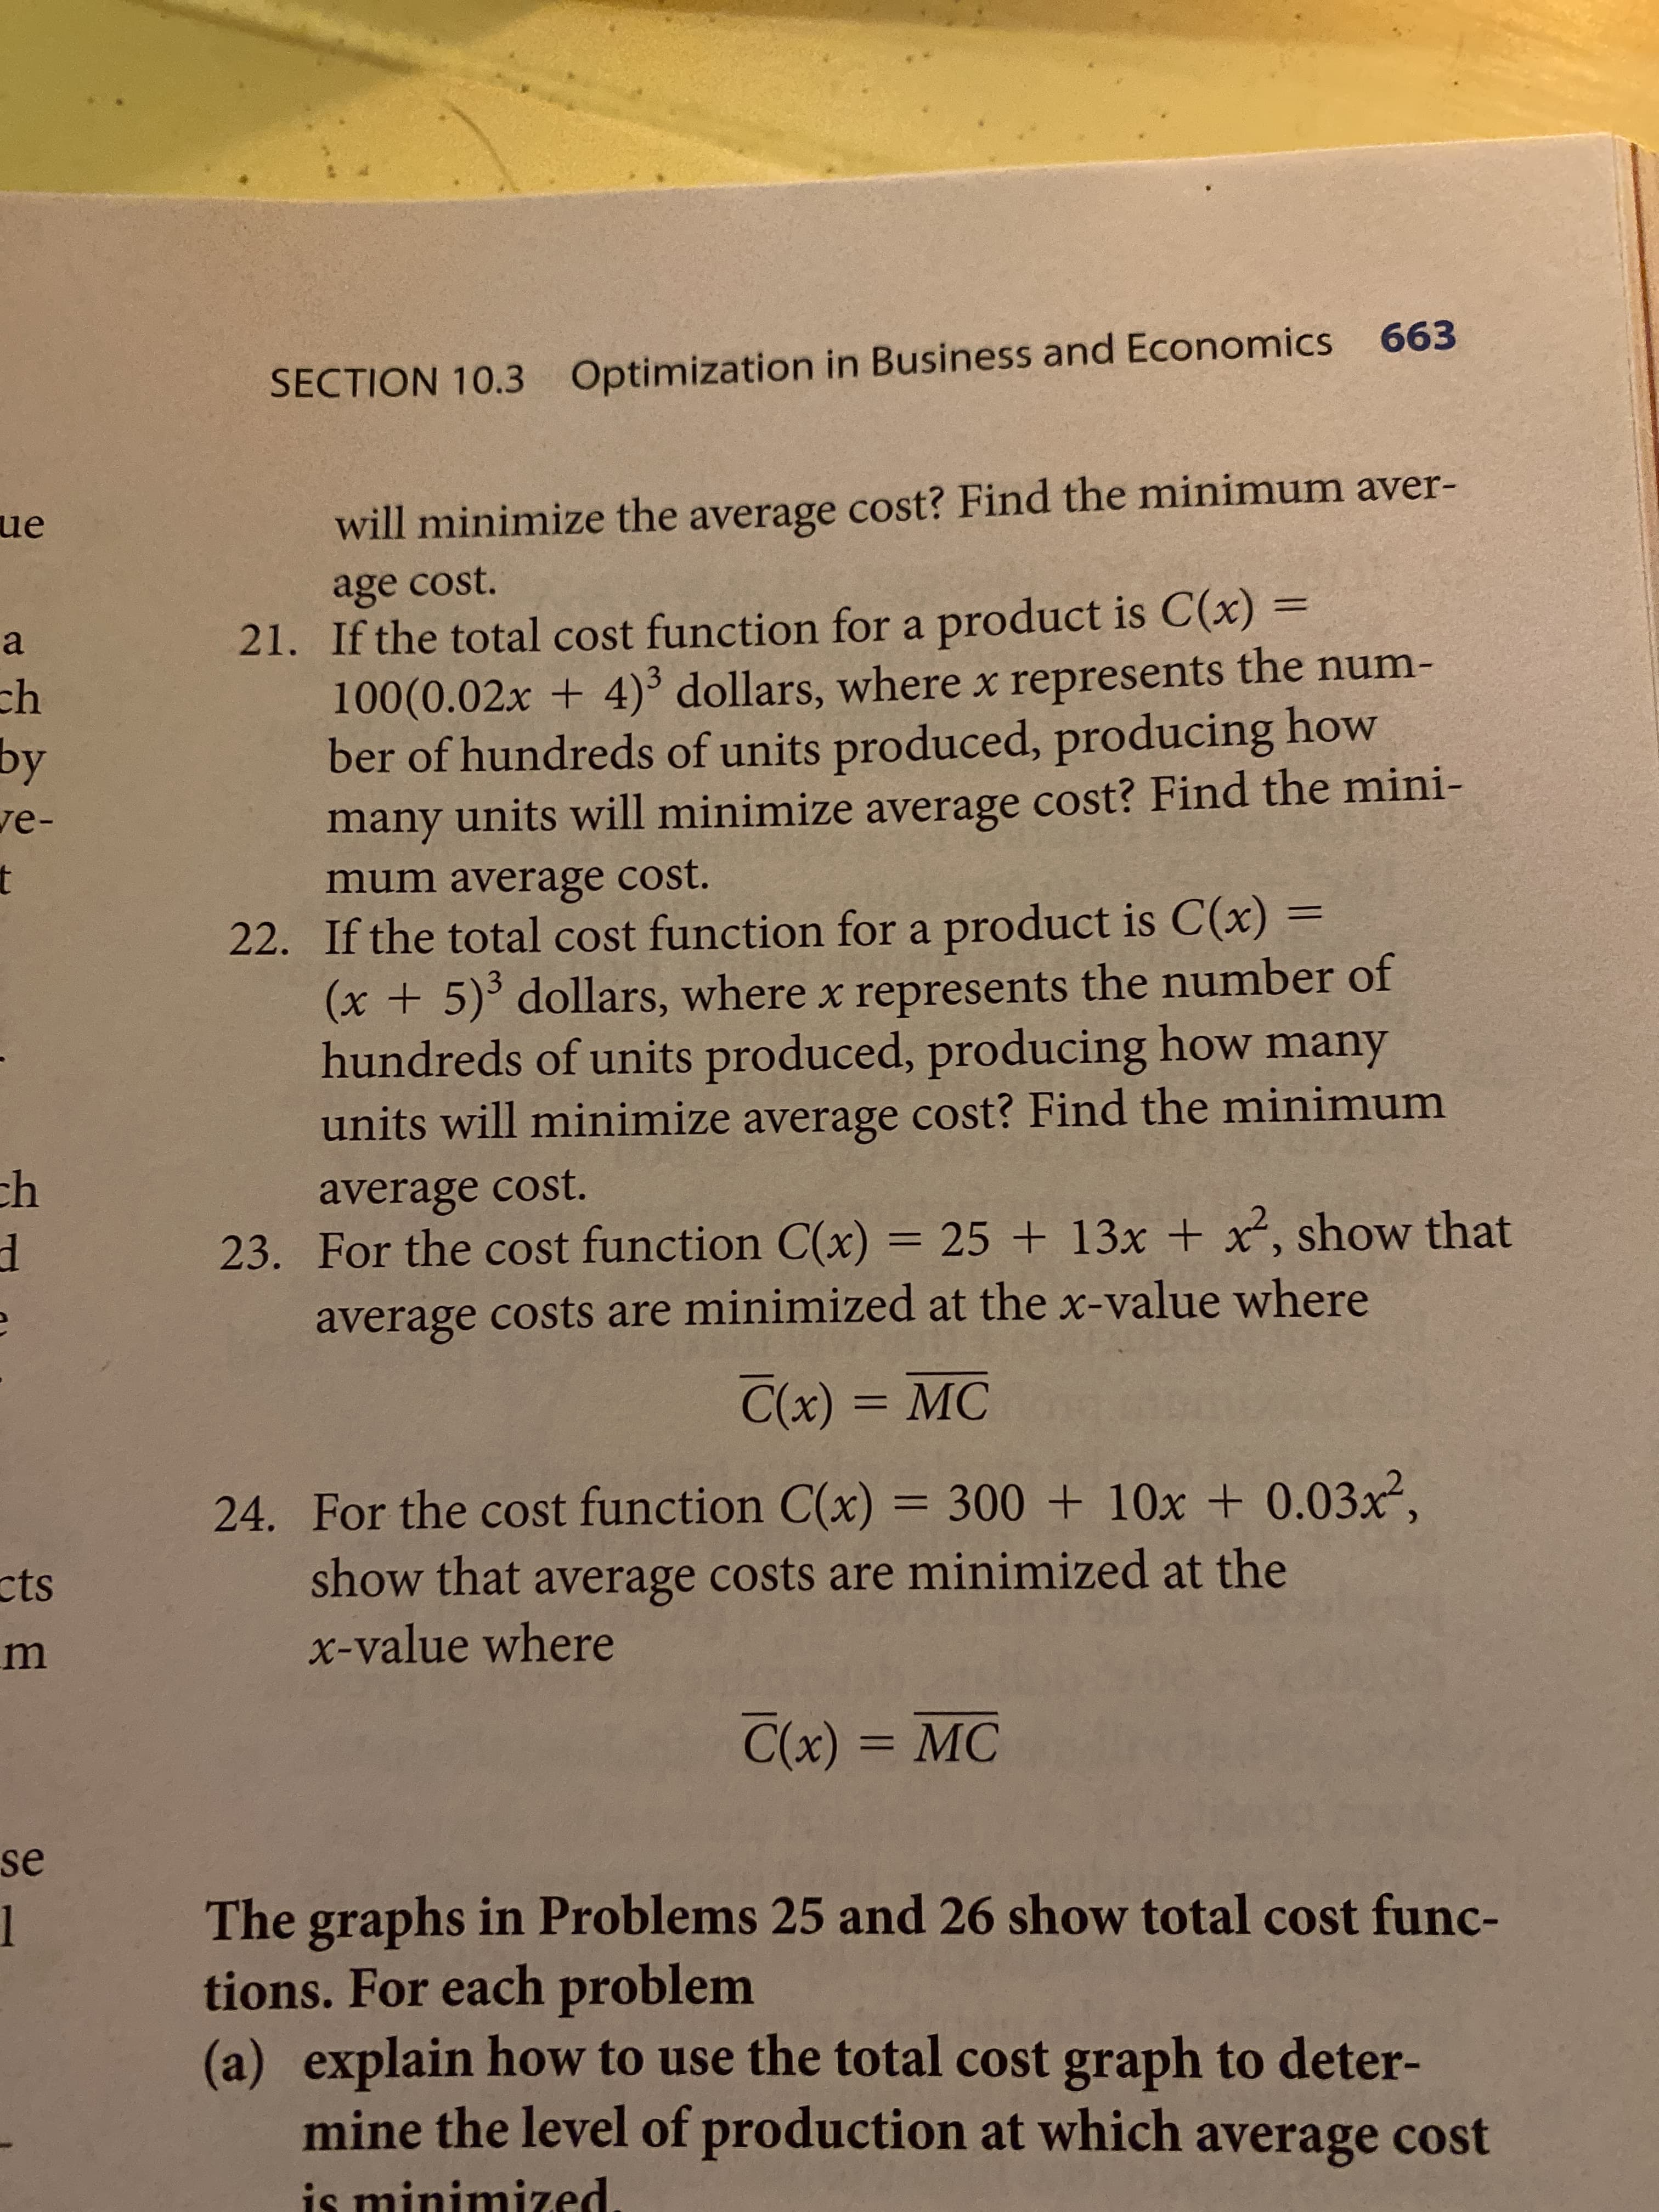 If the total cost function for a product is C(x) =
(x+5)° dollars, where x represents the number of
hundreds of units produced, producing how many
units will minimize average cost? Find the minimum
average cost.
